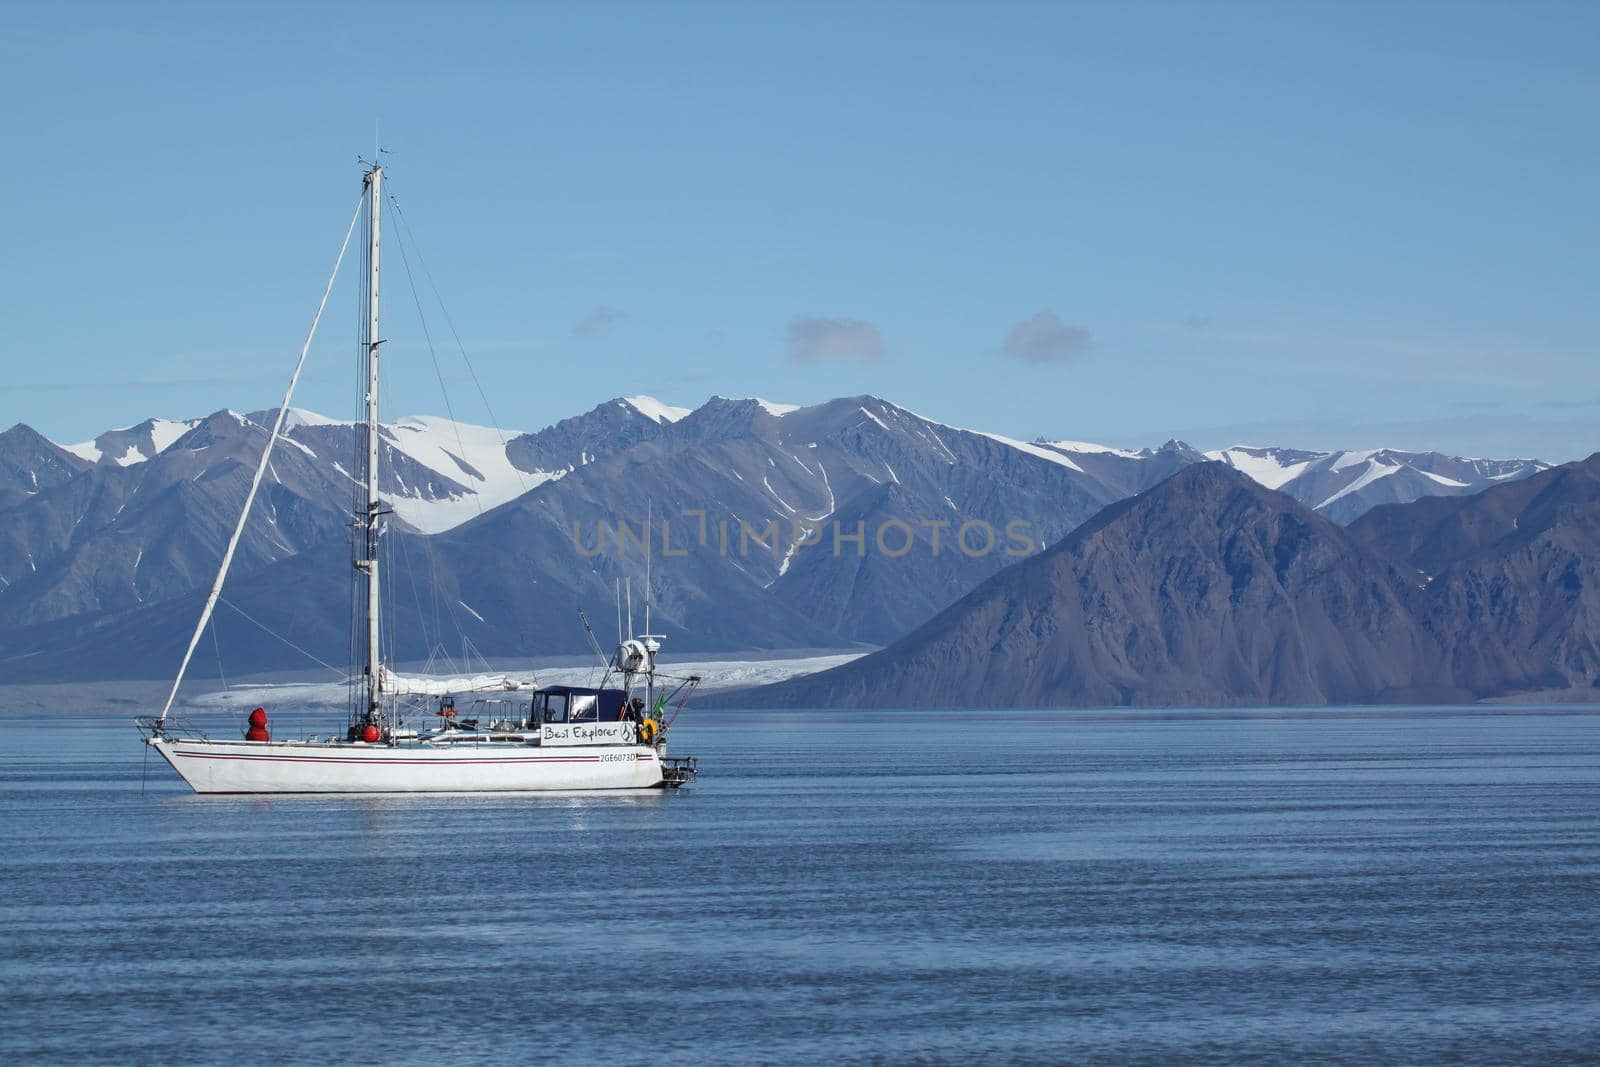 A sailboat anchored near Pond Inlet, Nunavut waiting for weather to transit through the Northwest Passage, Canada